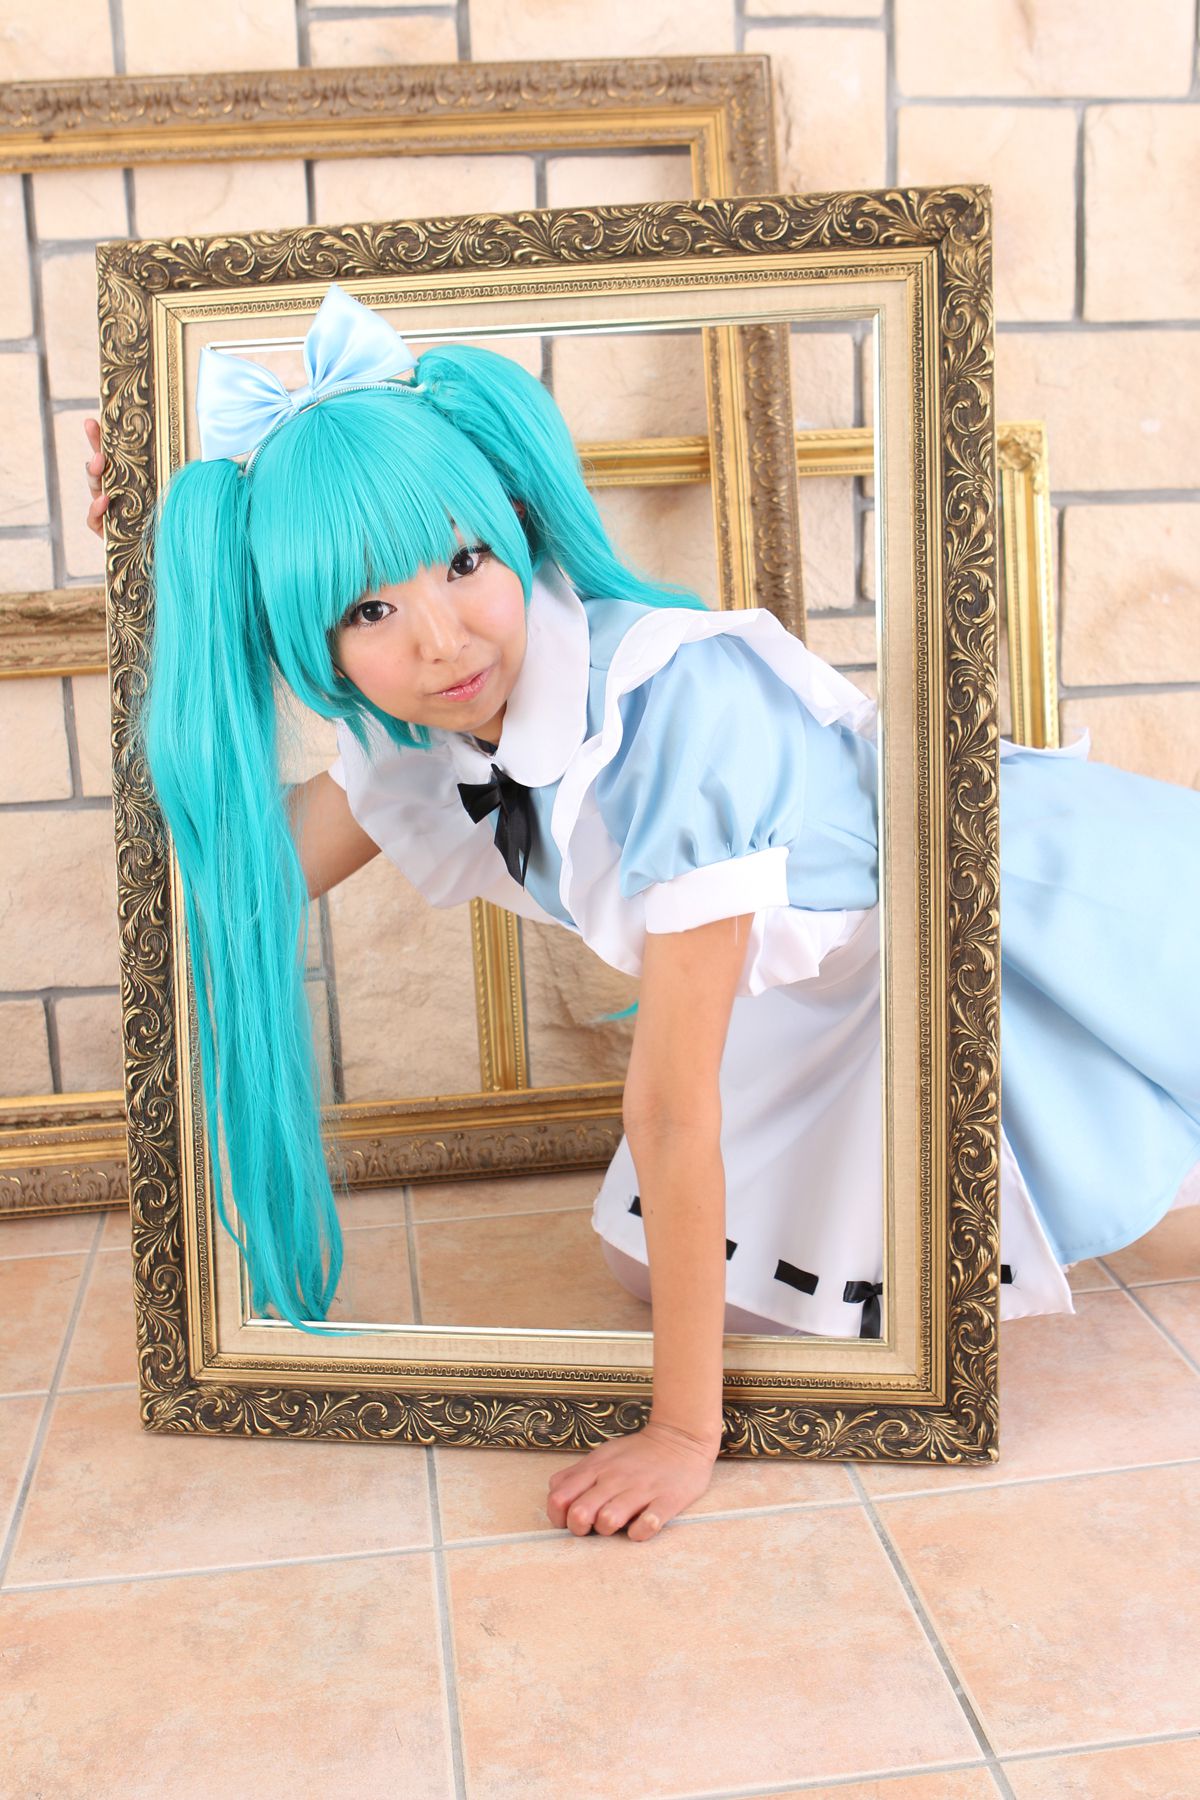 taotuhome[Cosplay套图] New Hatsune Miku from Vocaloid - So Sexy第81张